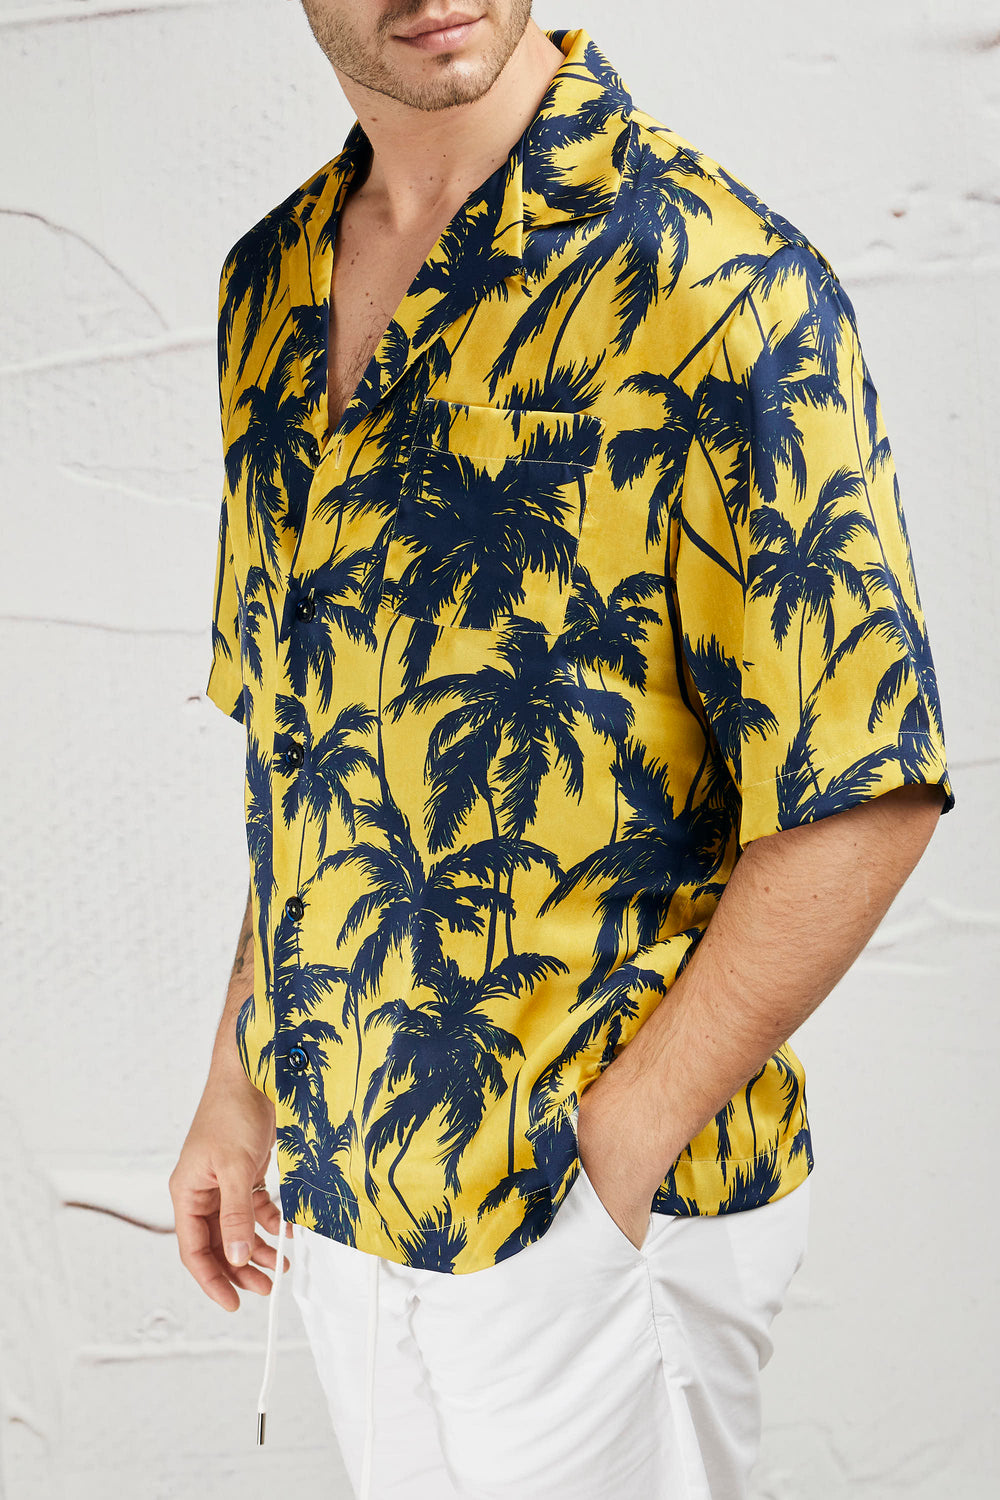 Summer Shirts: Guide to Online News for a Fashionable Summer